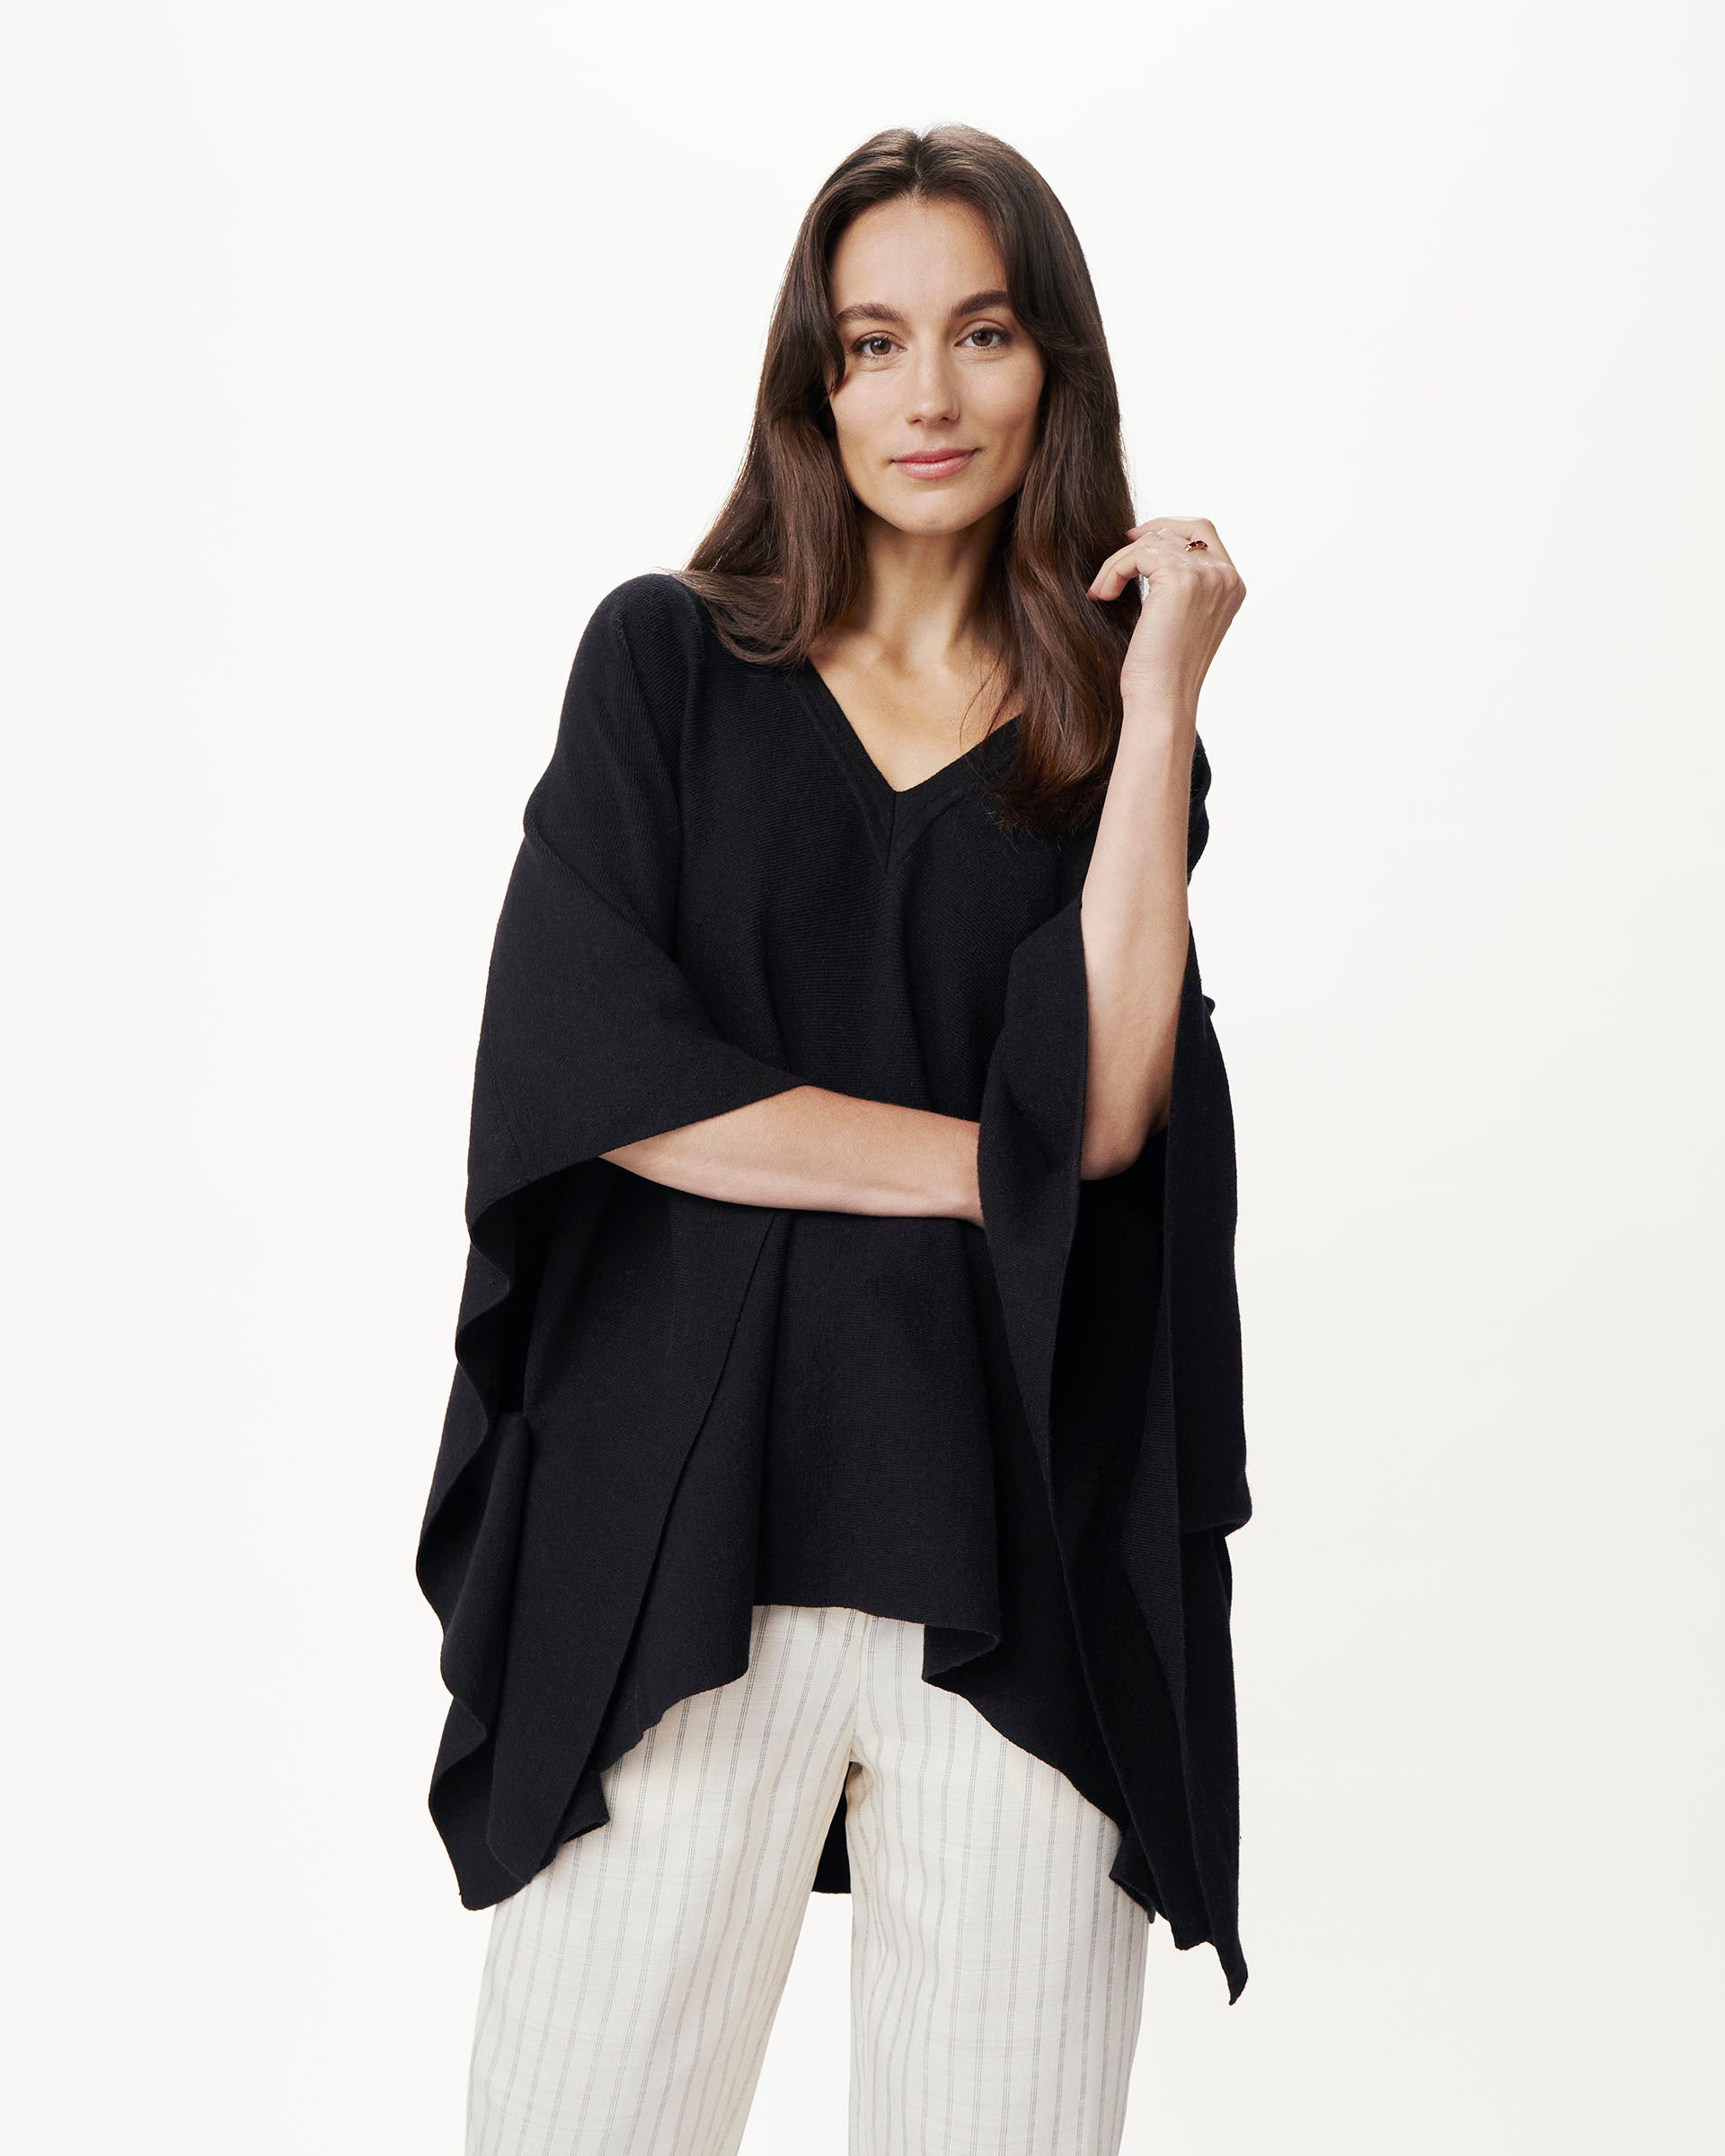 female wearing black v neck poncho with white pants on a white background